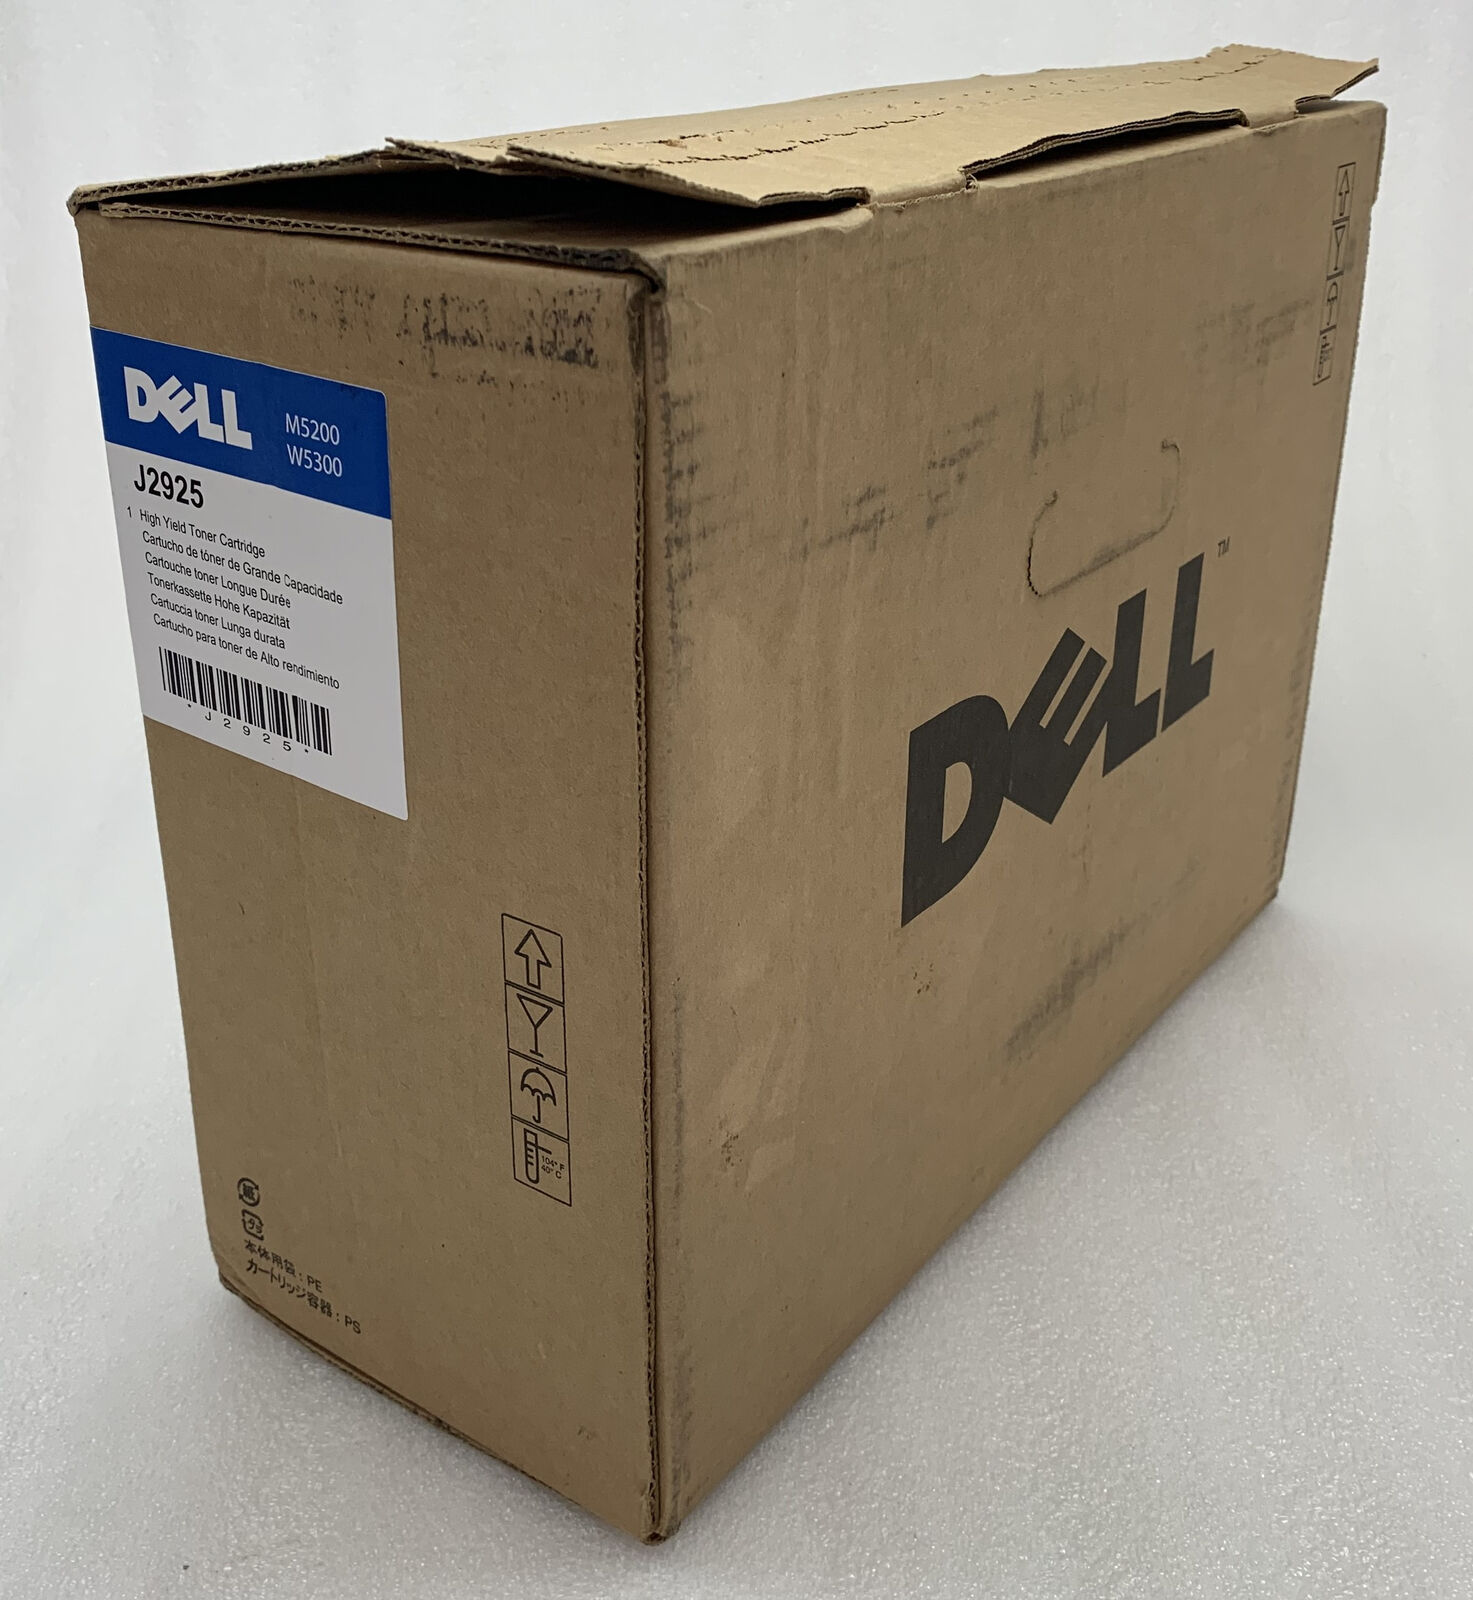 Genuine OEM New Open Box Dell J2925 Toner Cartridge for Models M5200 and W5300